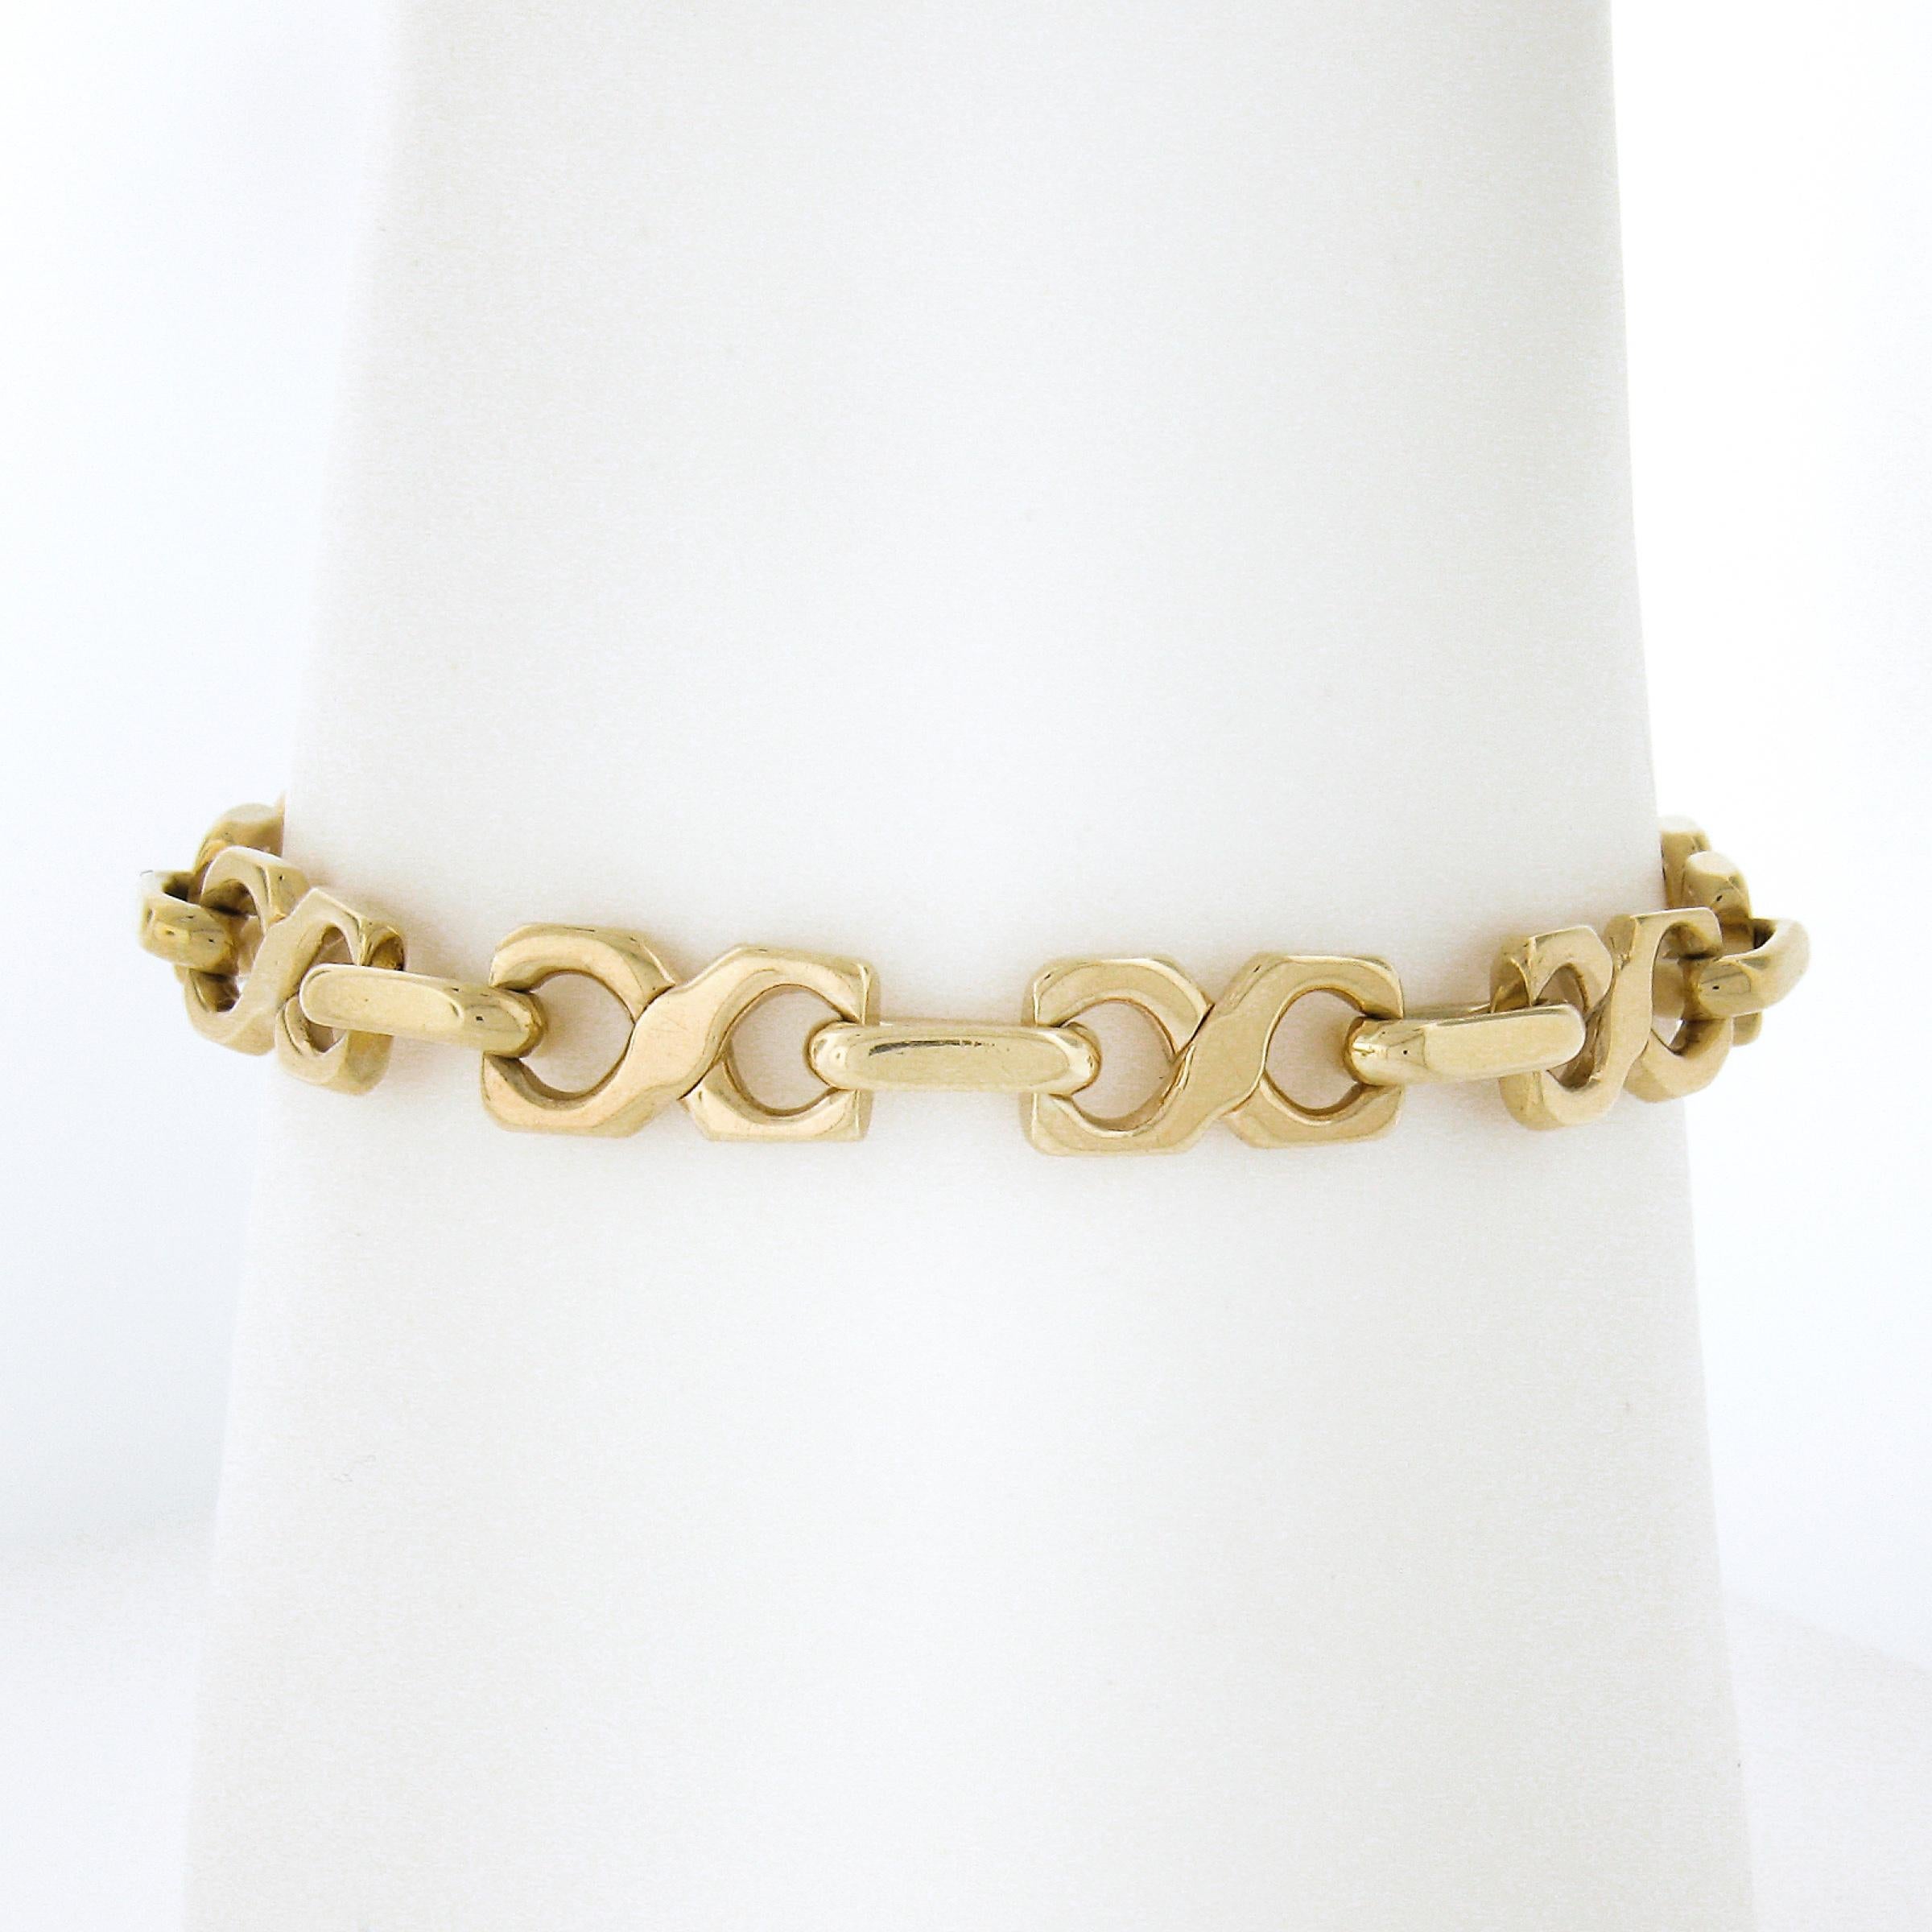 Material: Solid 14k Yellow Gold
Weight: 23.26 Grams
Chain Type: Alternated Figure 8 & Open Oval Link
Chain Length:	Will fit up to a 6.5 inch wrist (fitted on a wrist)
Clasp: Lobster Claw
Width: 7.2mm (at the figure 8 link)
Thickness: 5.5mm rise off